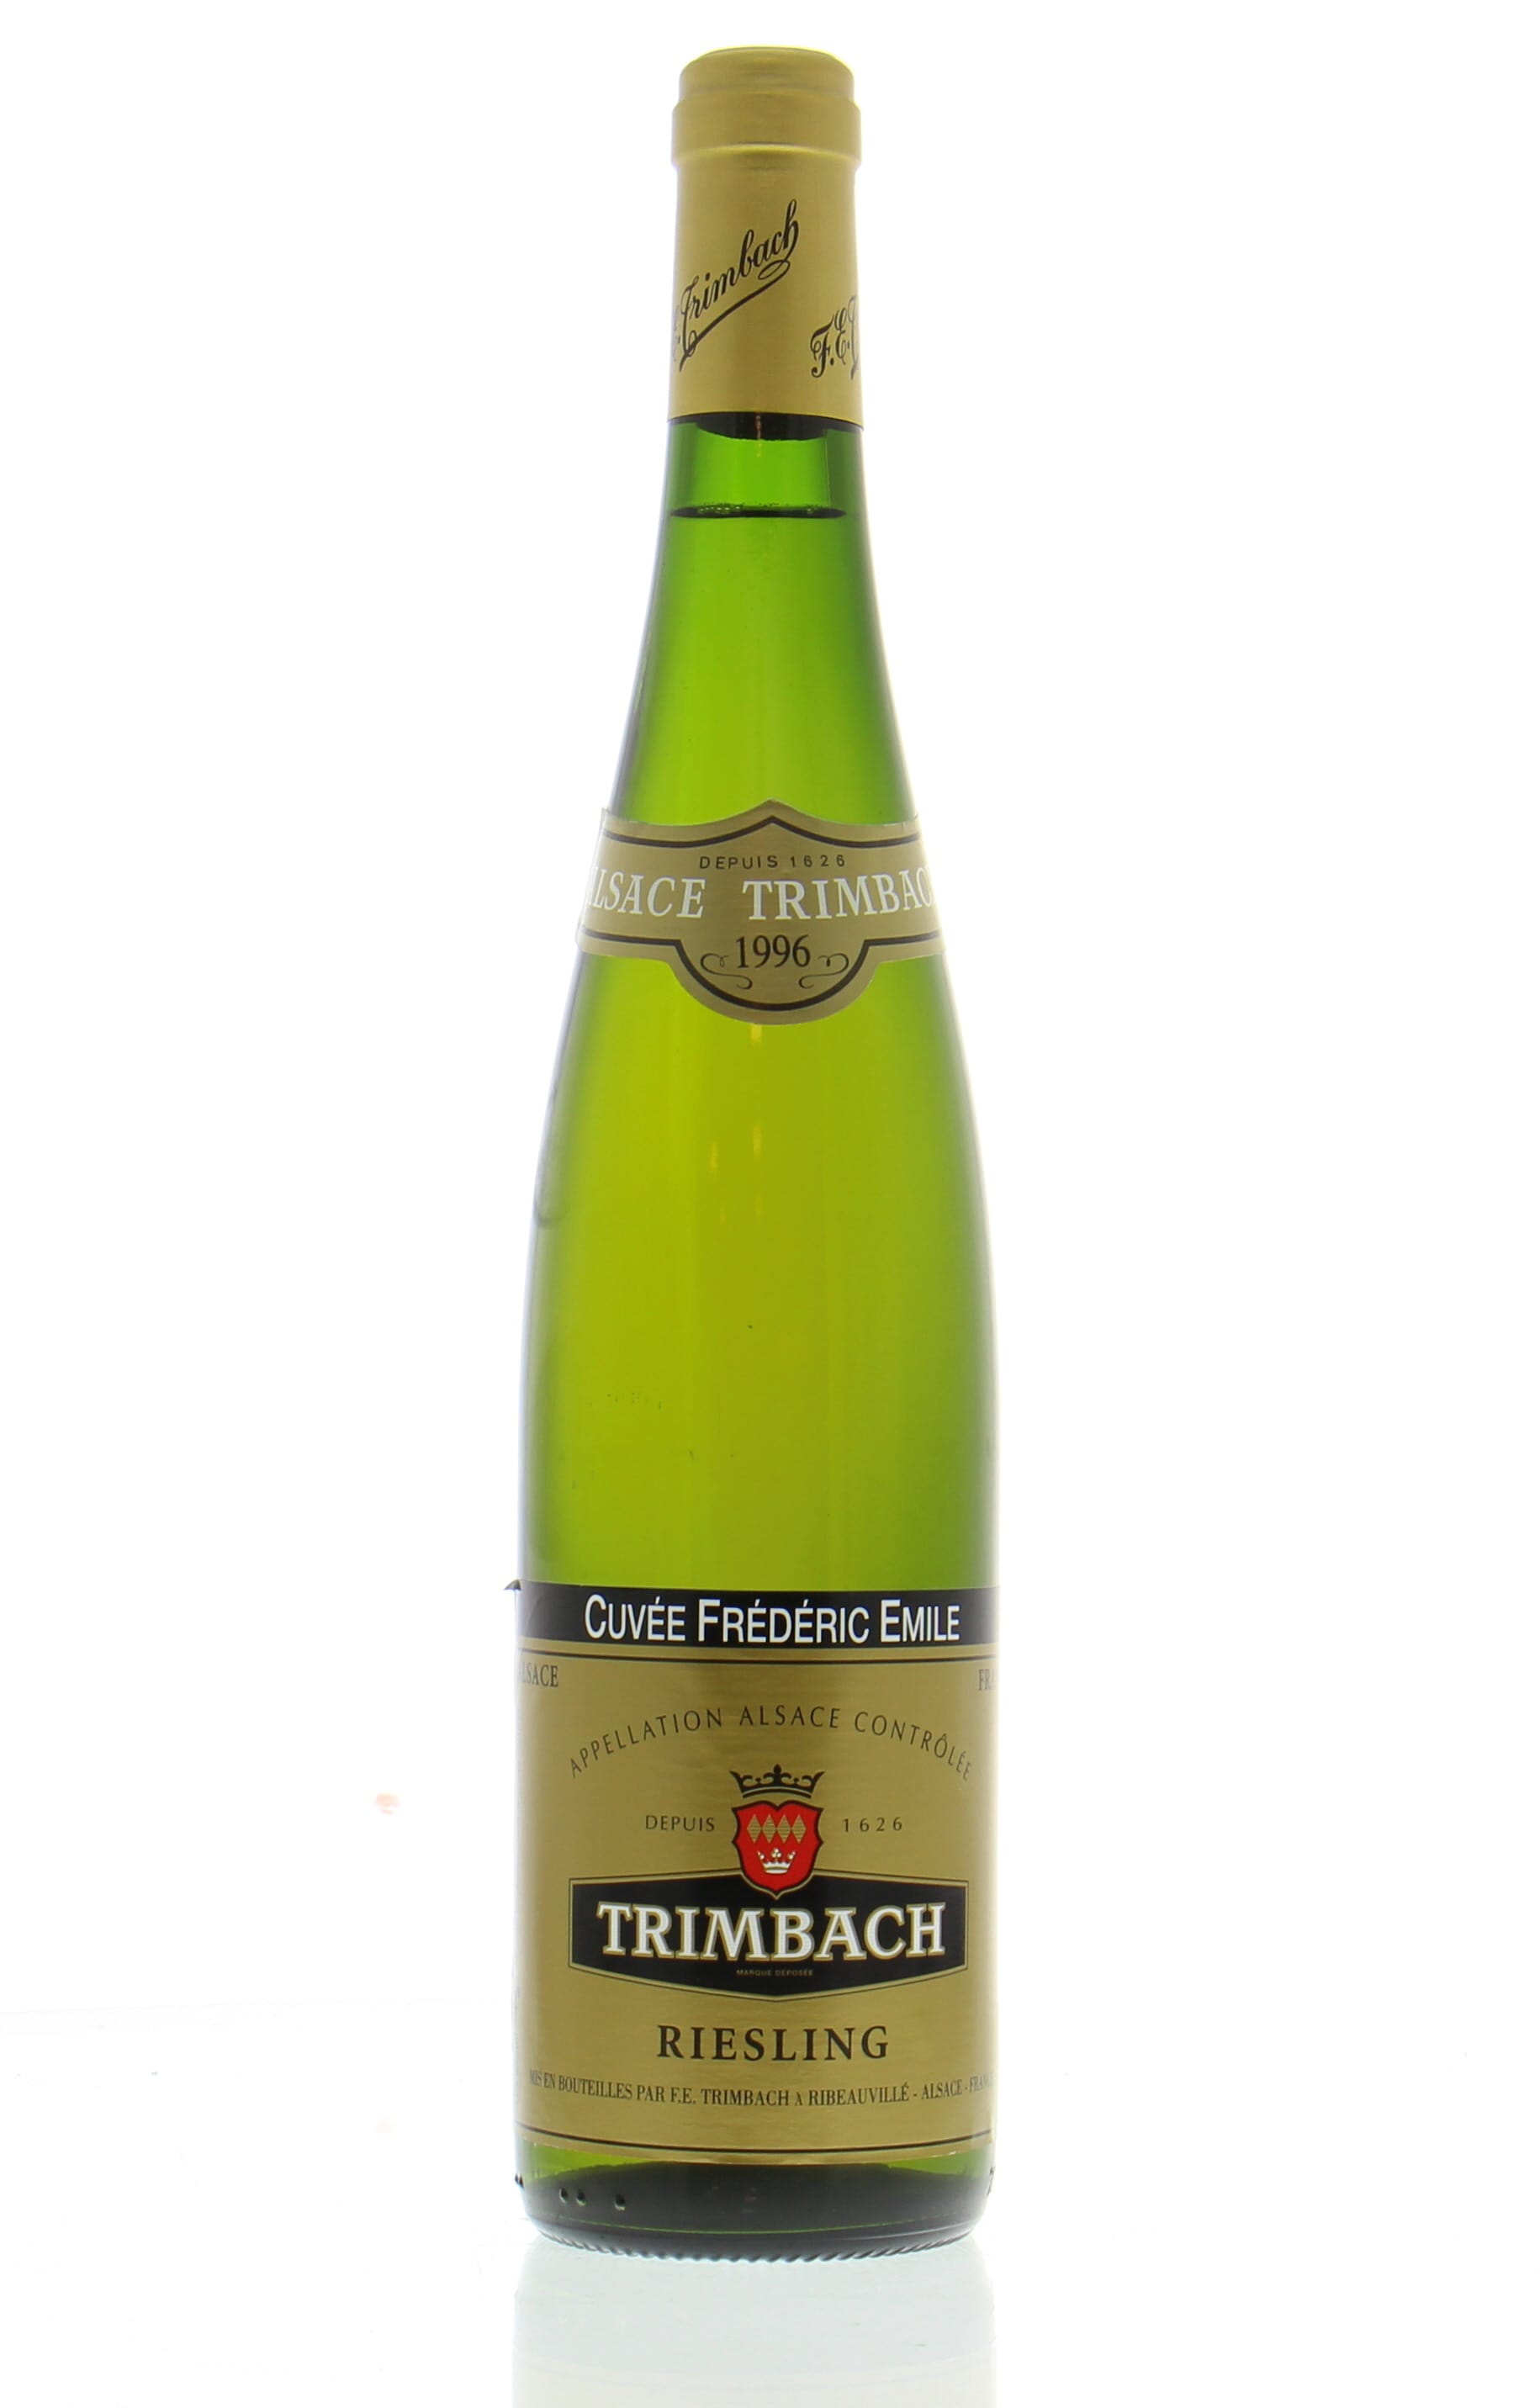 Trimbach - Riesling Cuvee Frederic Emile 1996 Perfect